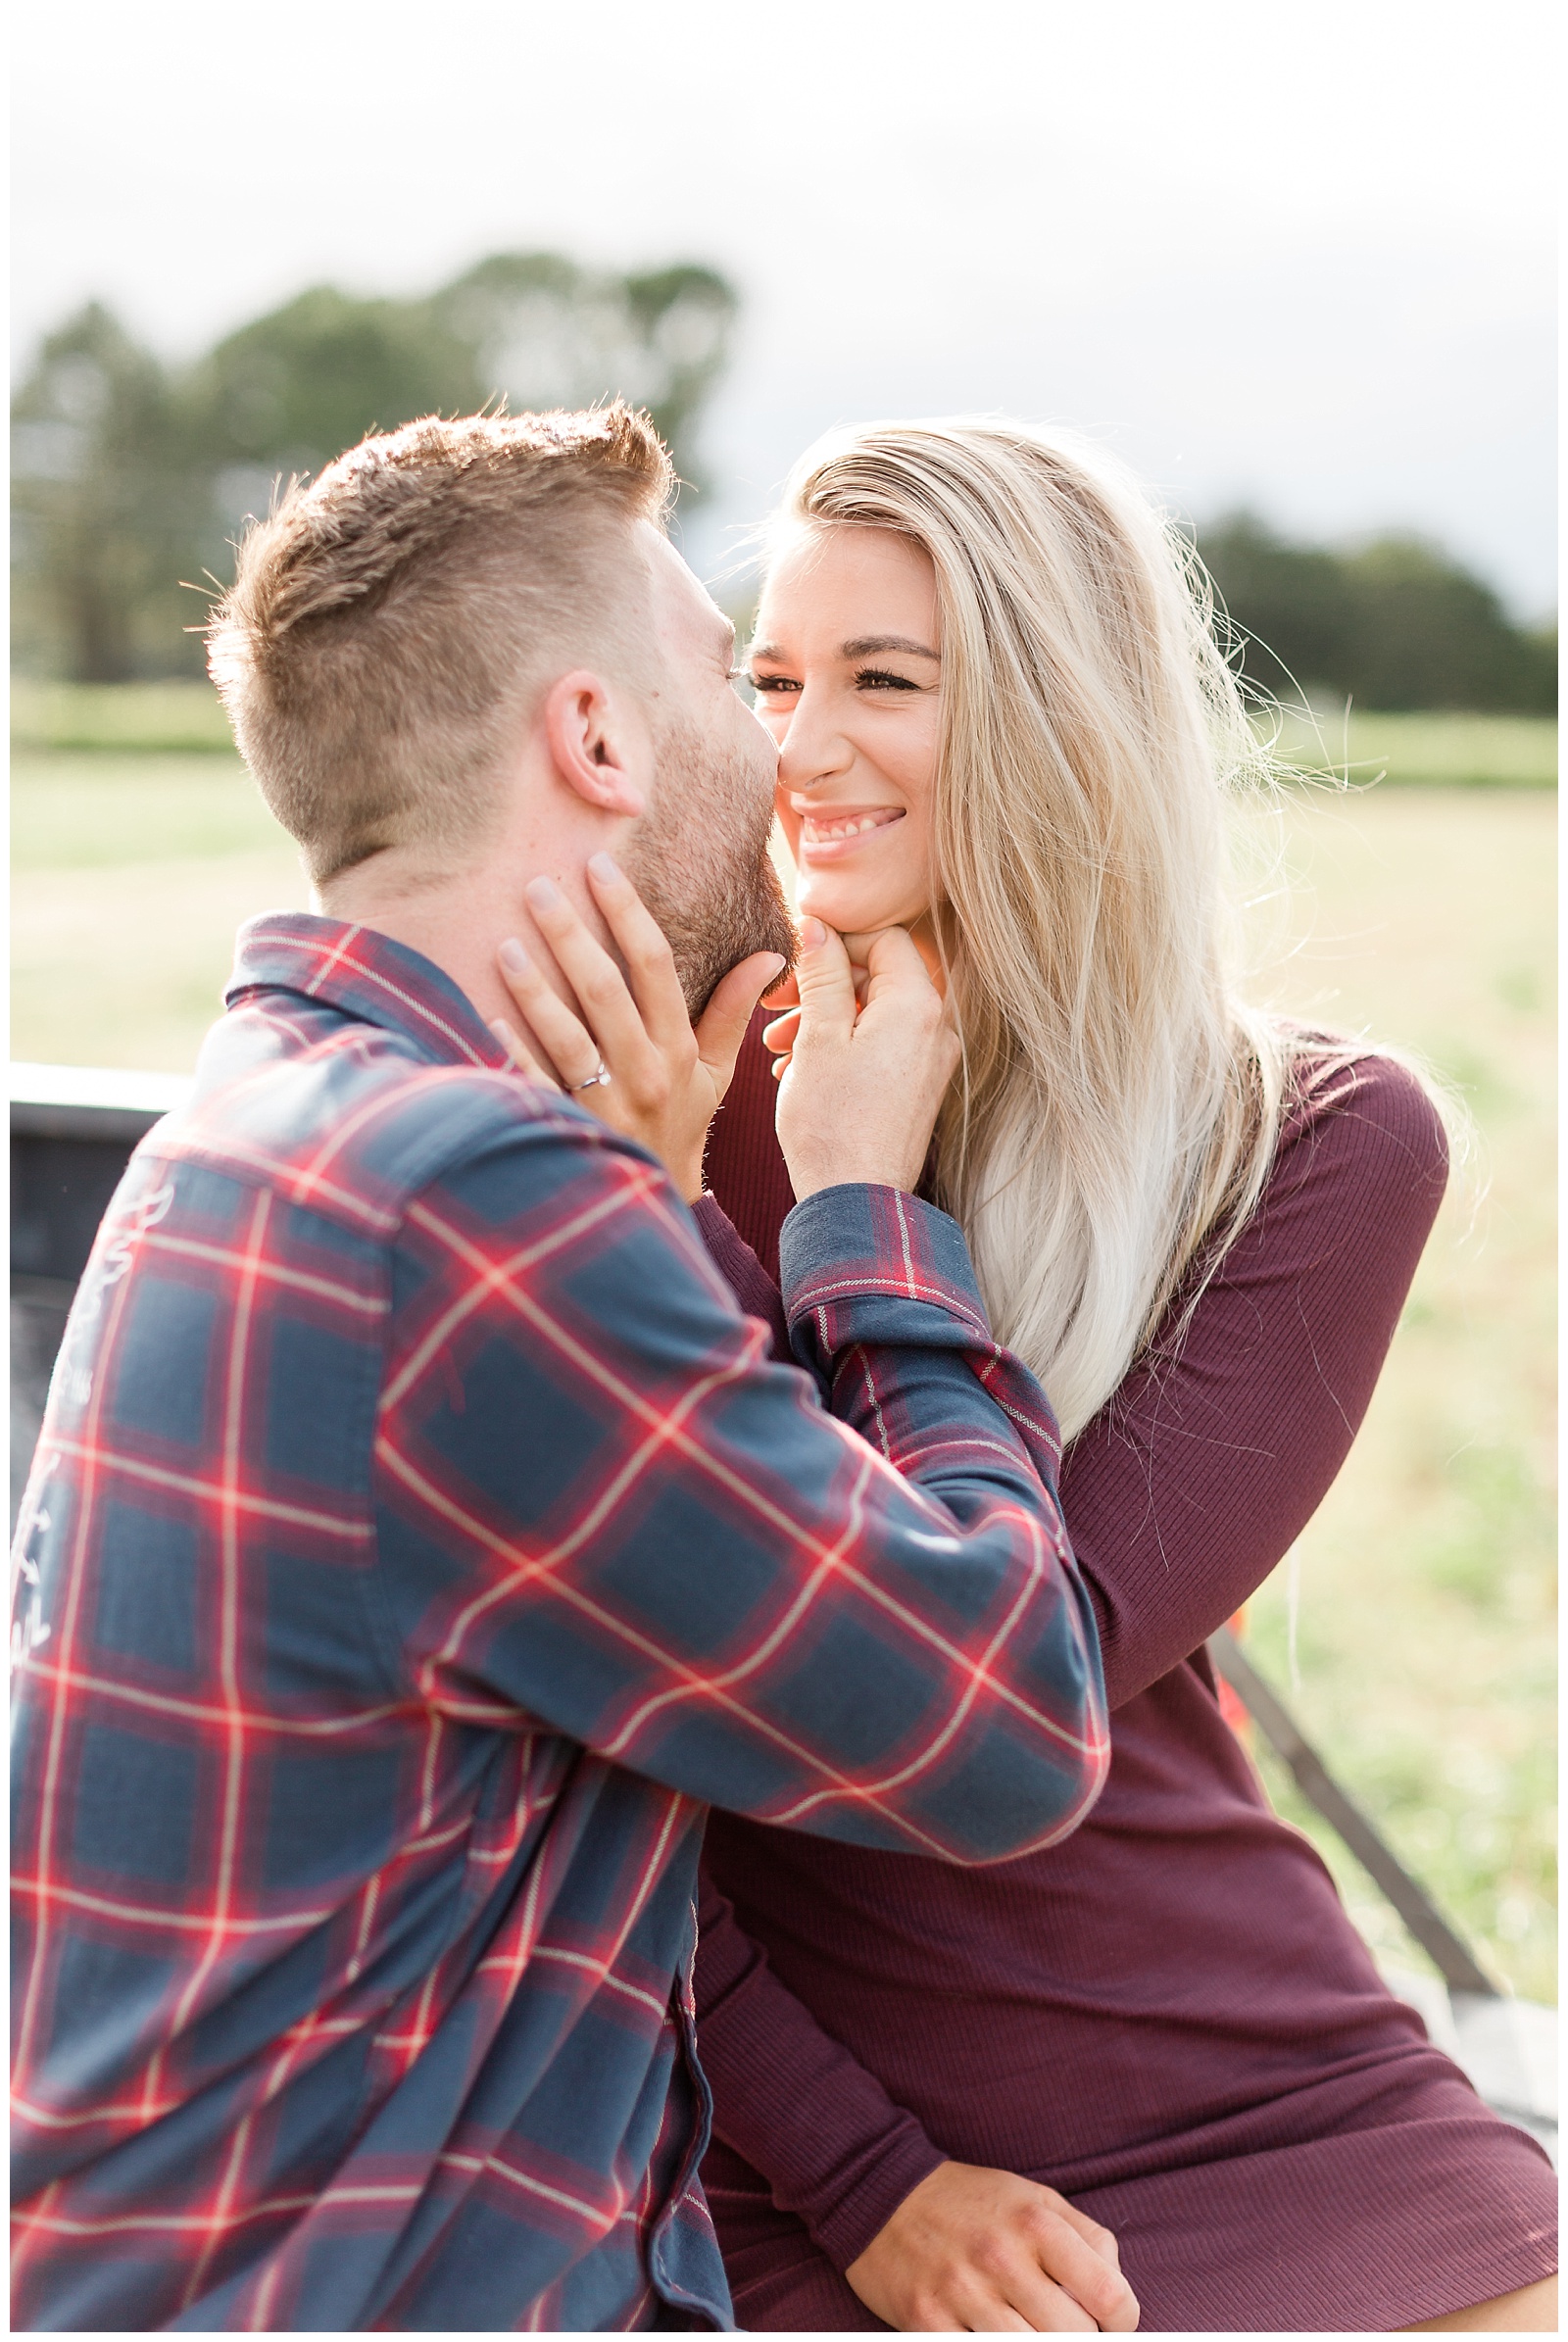 cullipher-farms-engagement-session-8.jpg